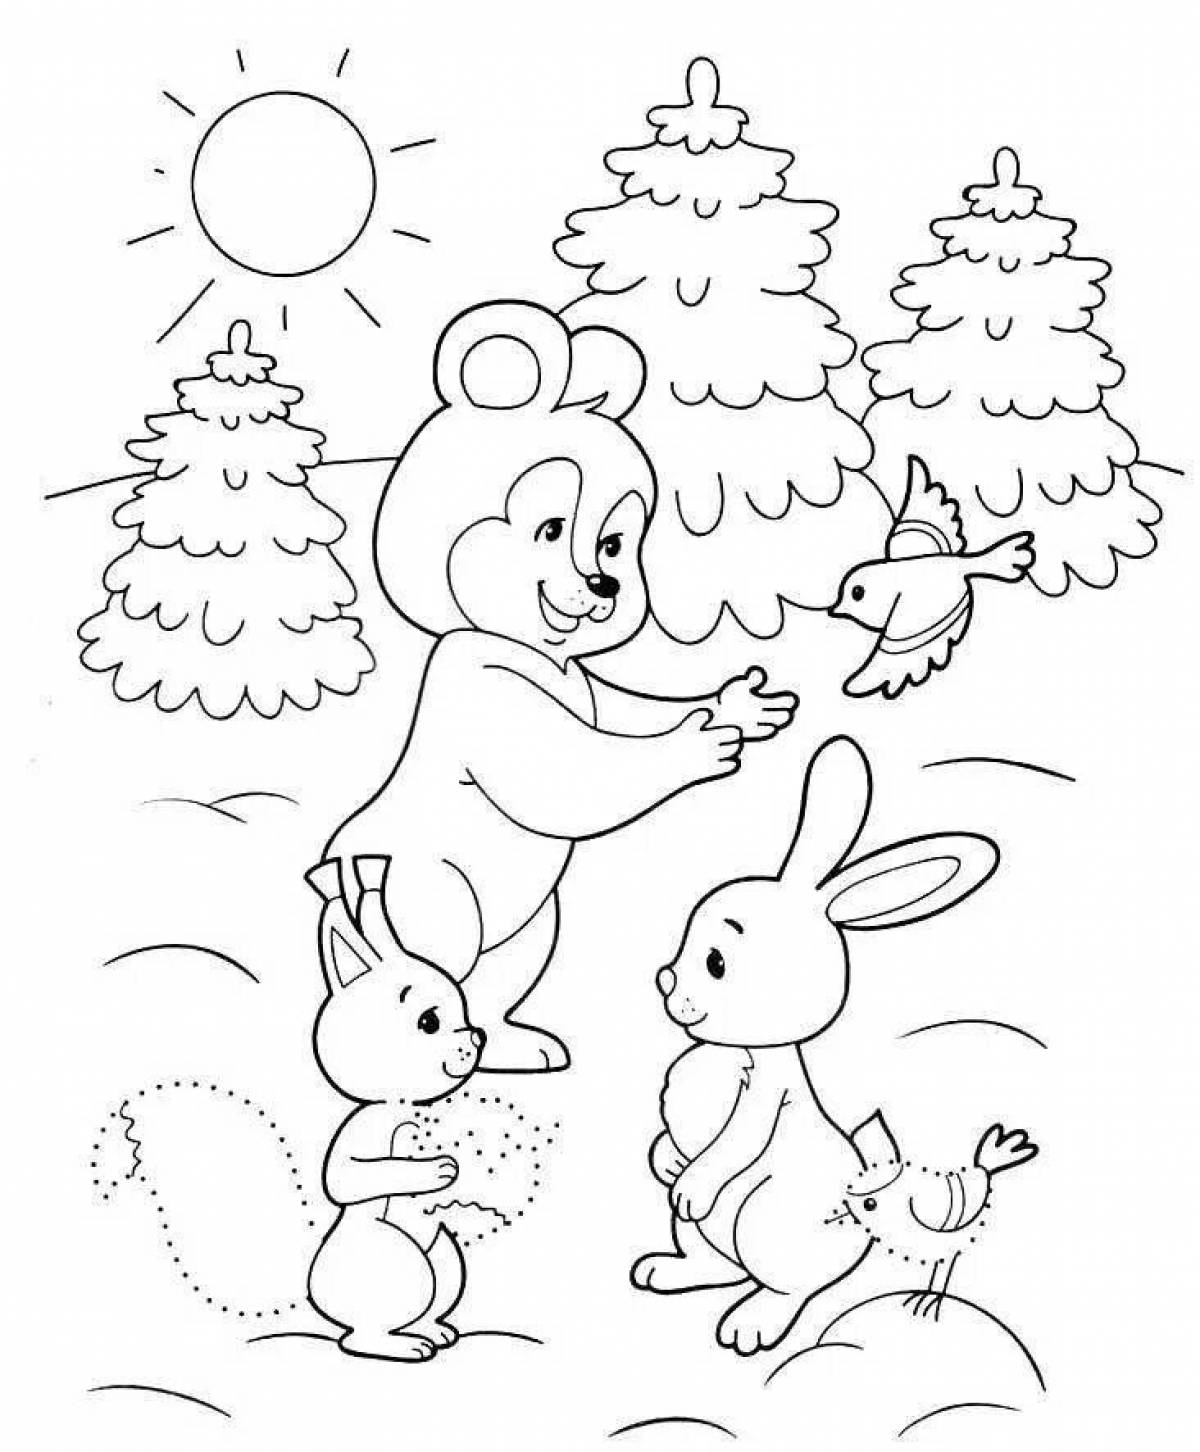 Violent coloring for children 3-4 years old winter new year